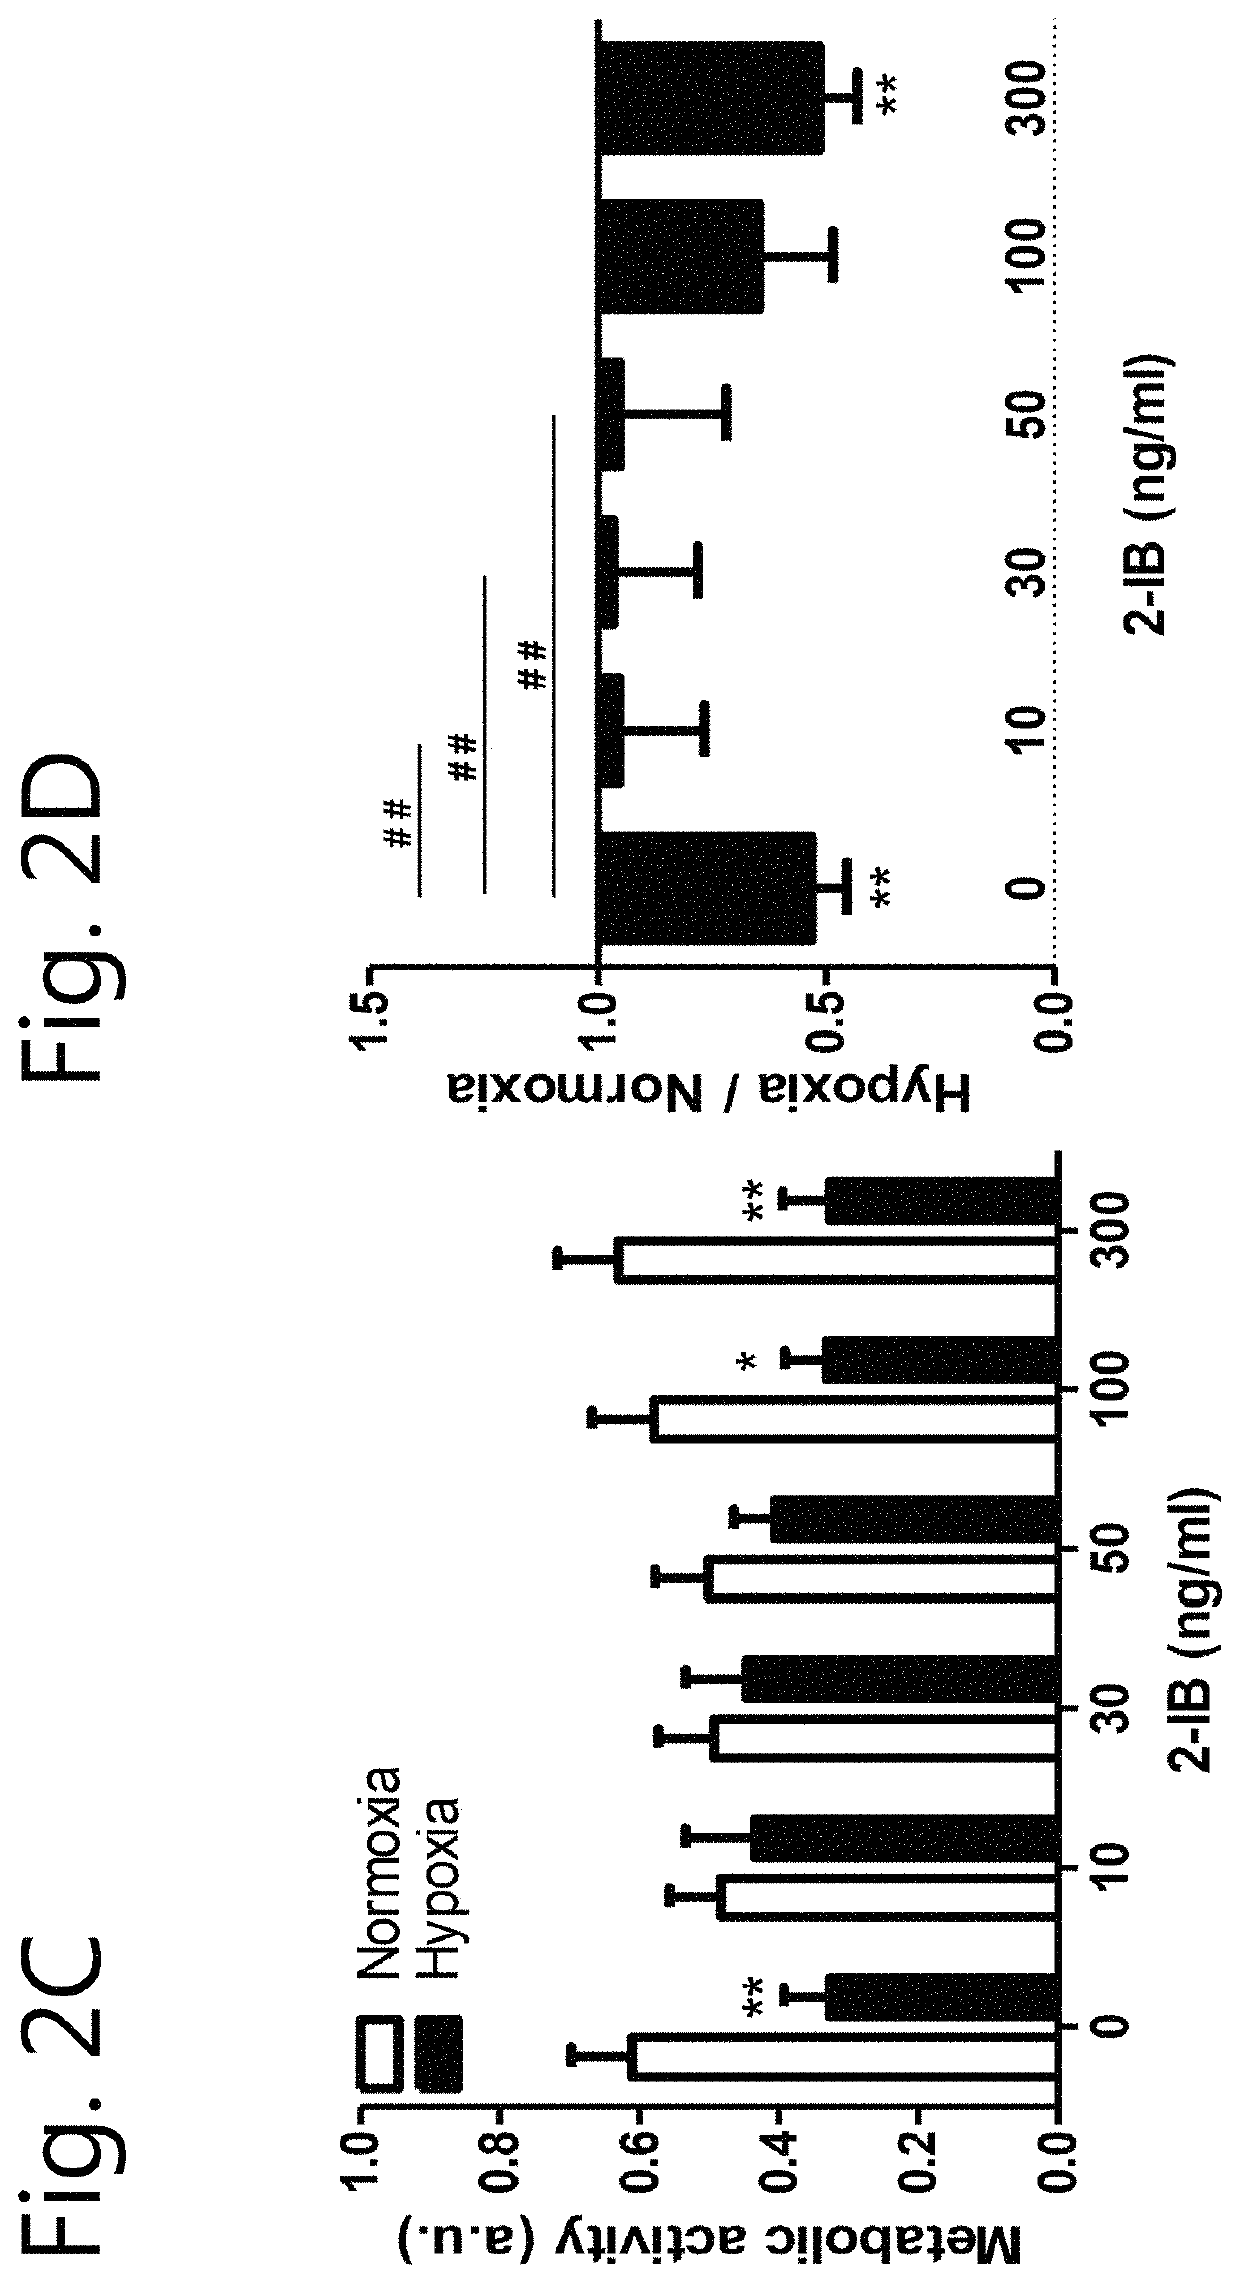 2-iminobiotin for use in the treatment of brain cell injury